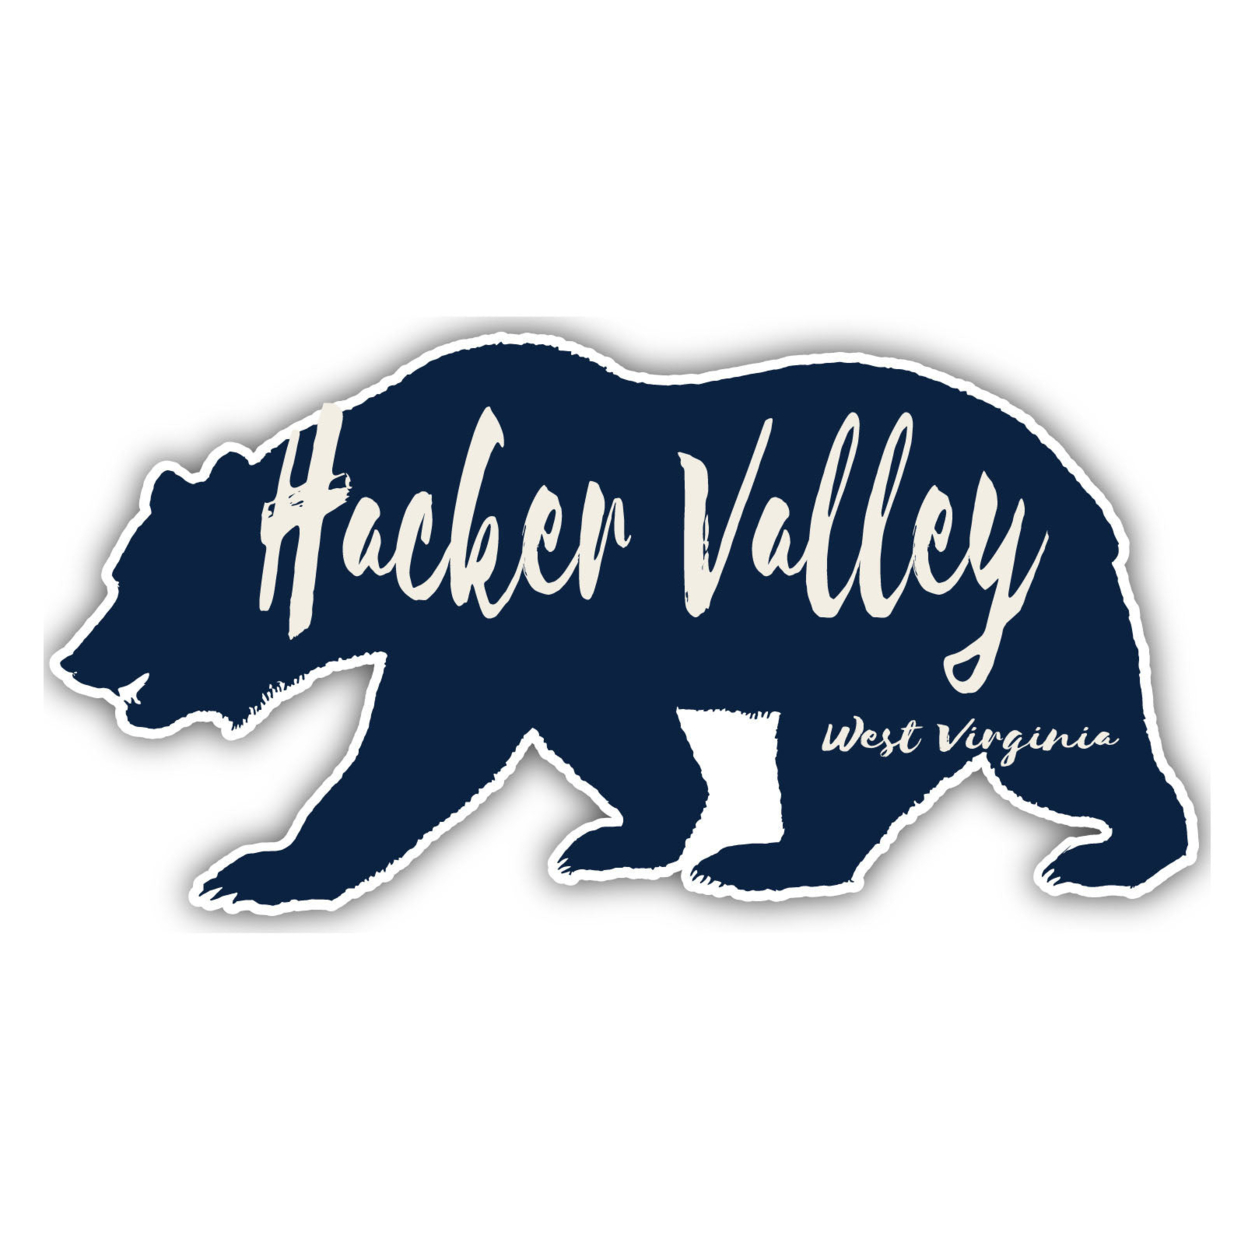 Hacker Valley West Virginia Souvenir Decorative Stickers (Choose Theme And Size) - 4-Pack, 6-Inch, Great Outdoors